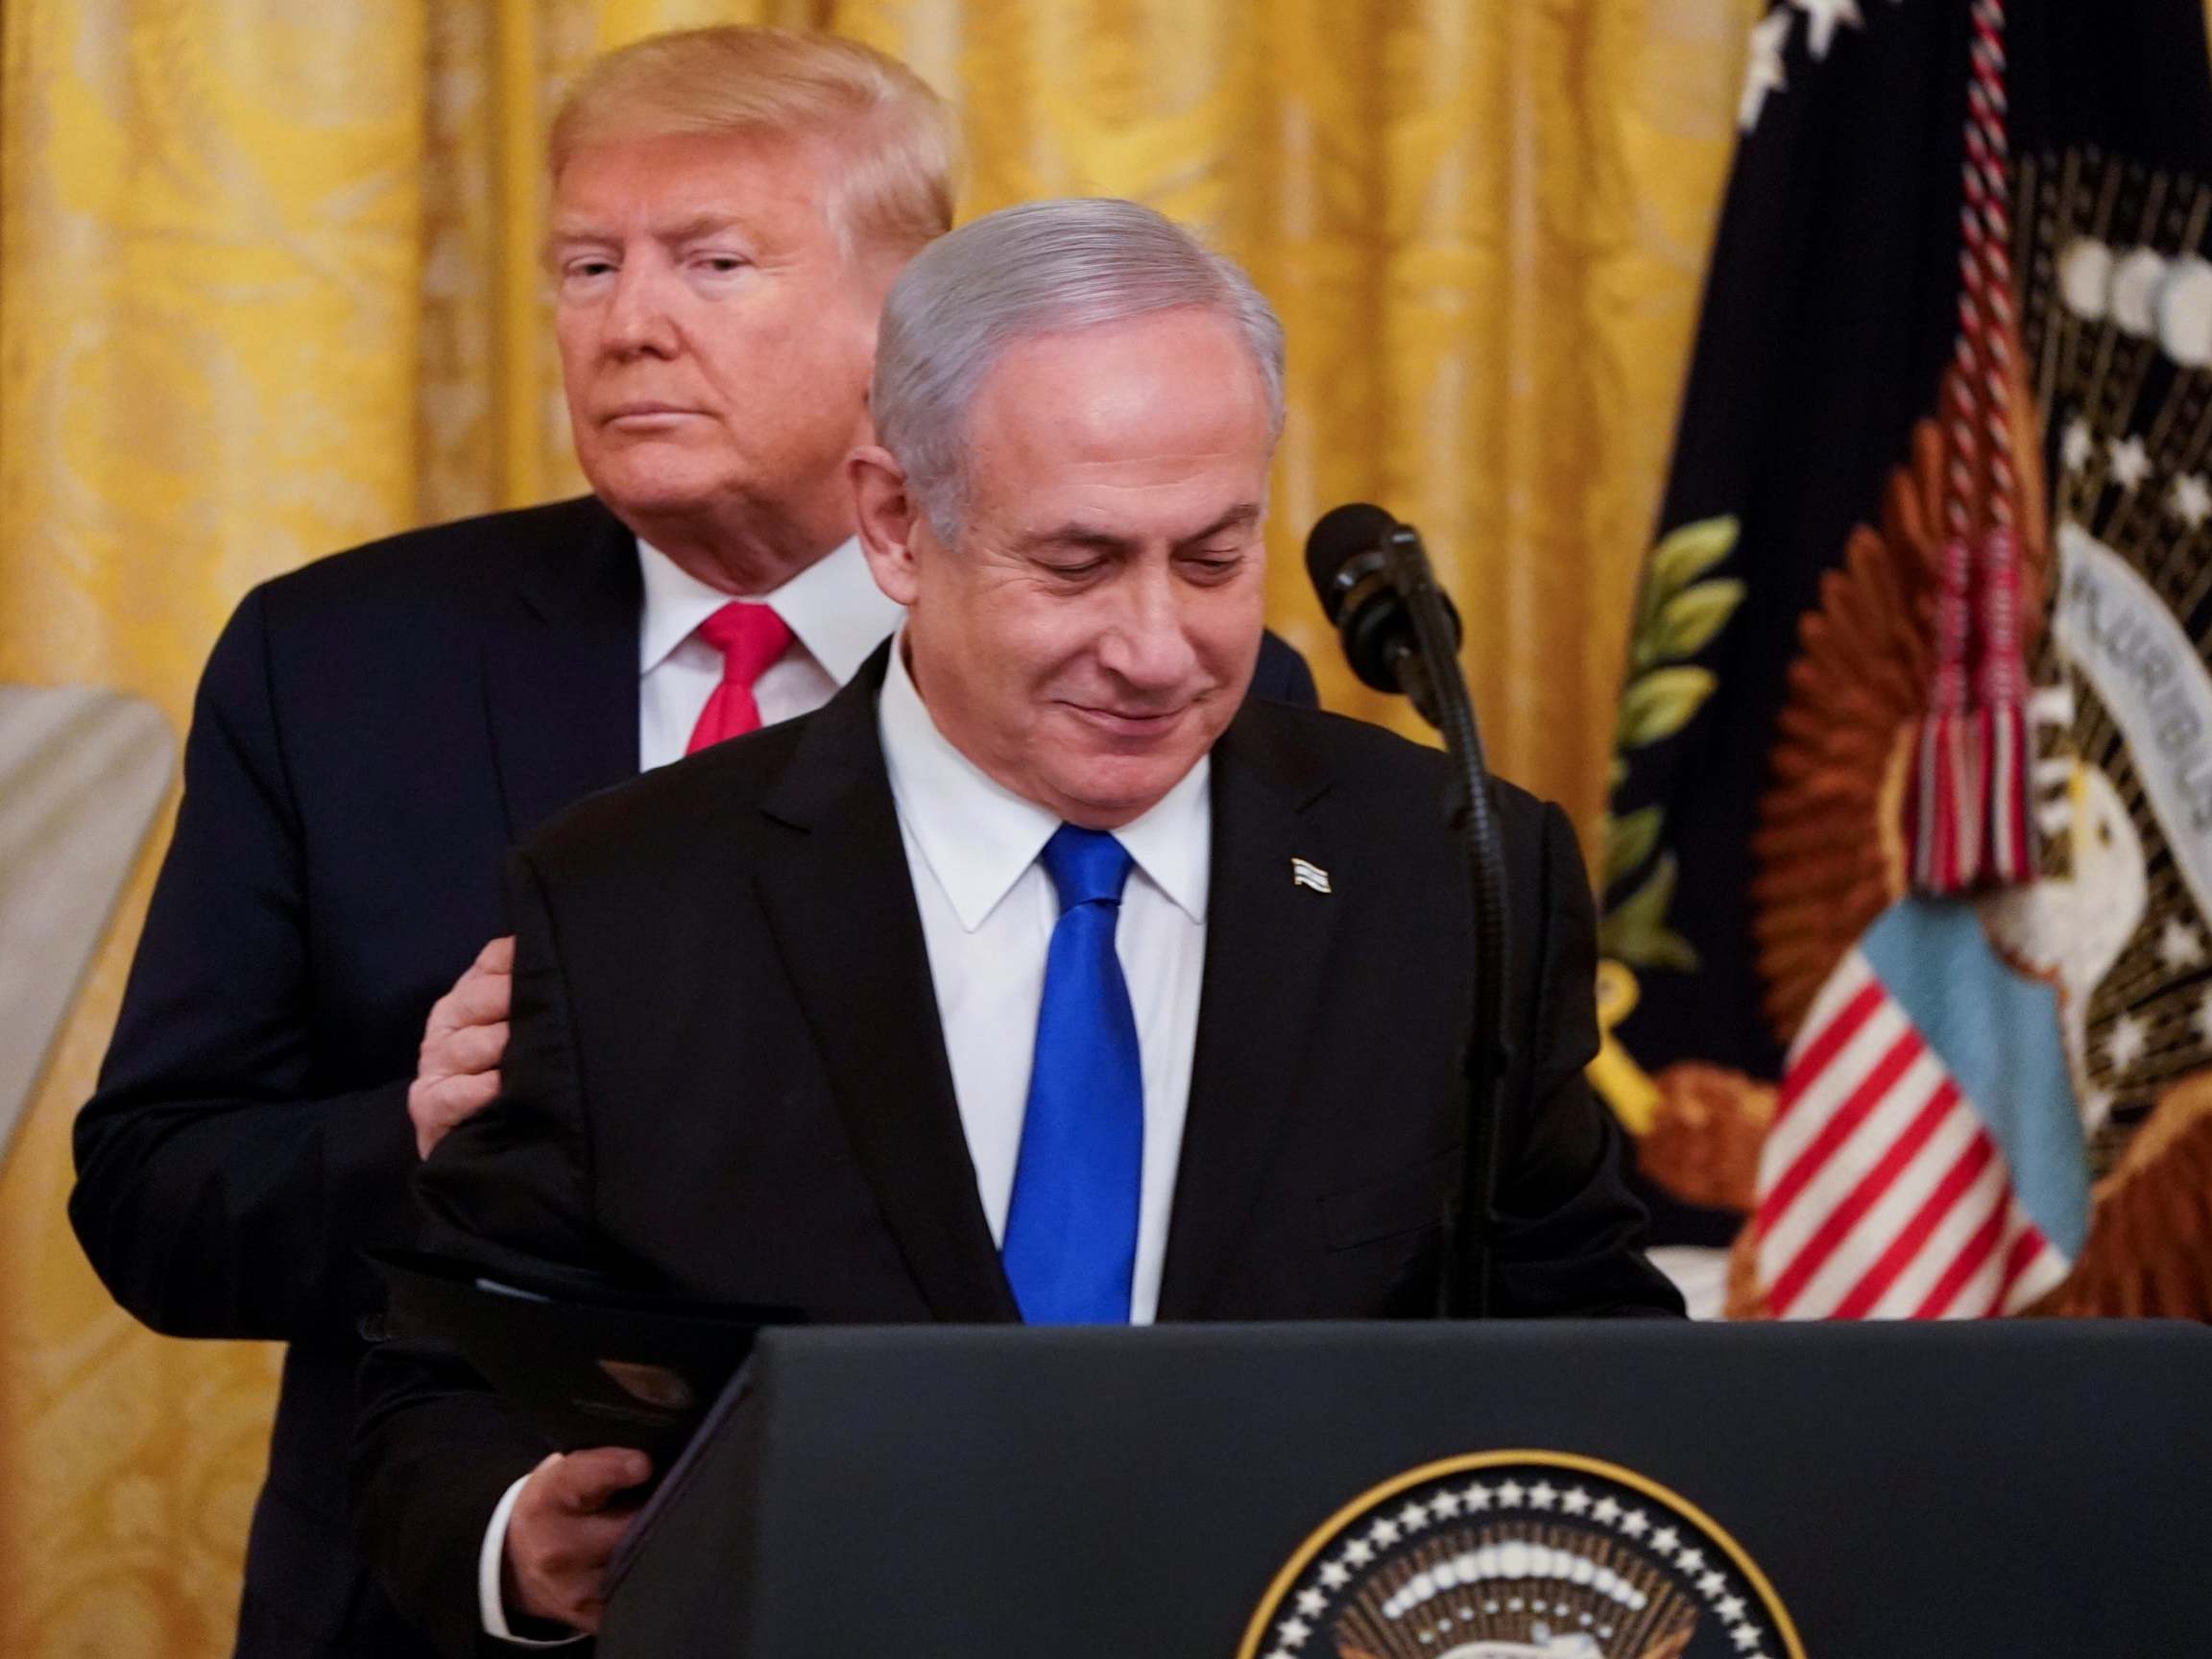 Trump and Netanyahu unveil the peace plan at the White House